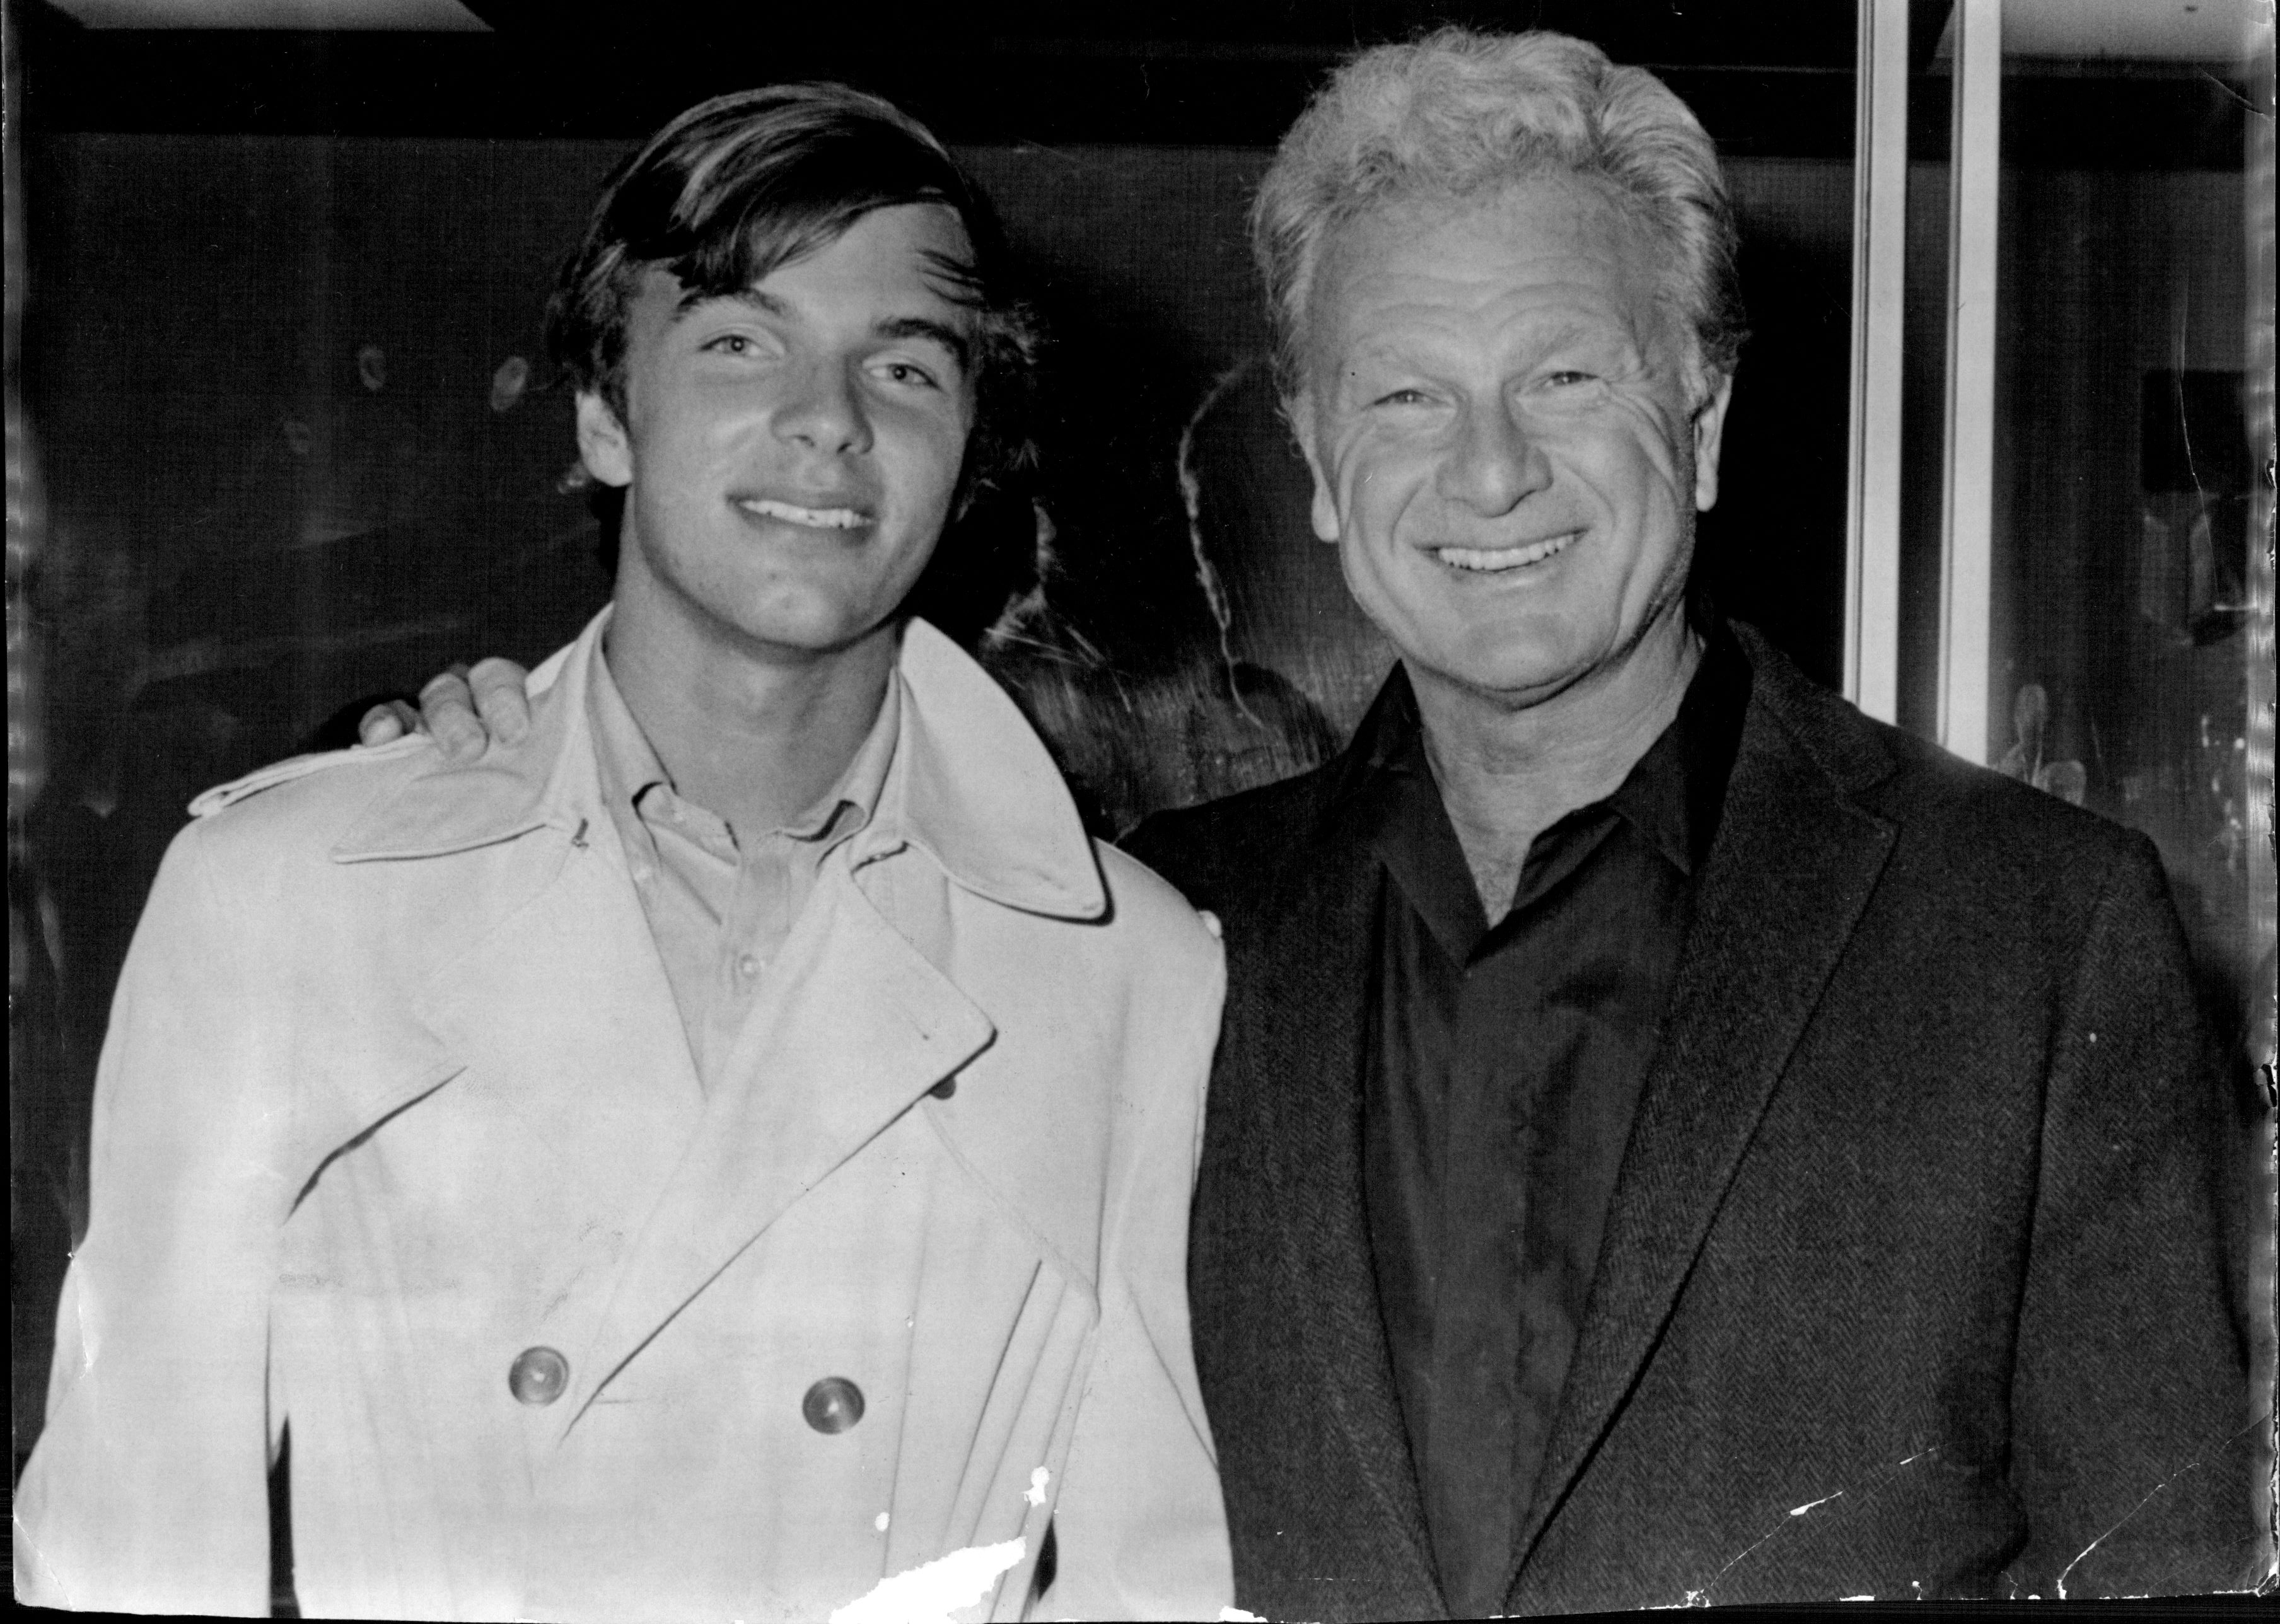  Edward Albert Jr and father, Eddie Albert at the Commonwealth Health Departments City Vaccination centre. September 04, 1969. | Photo: Getty Images